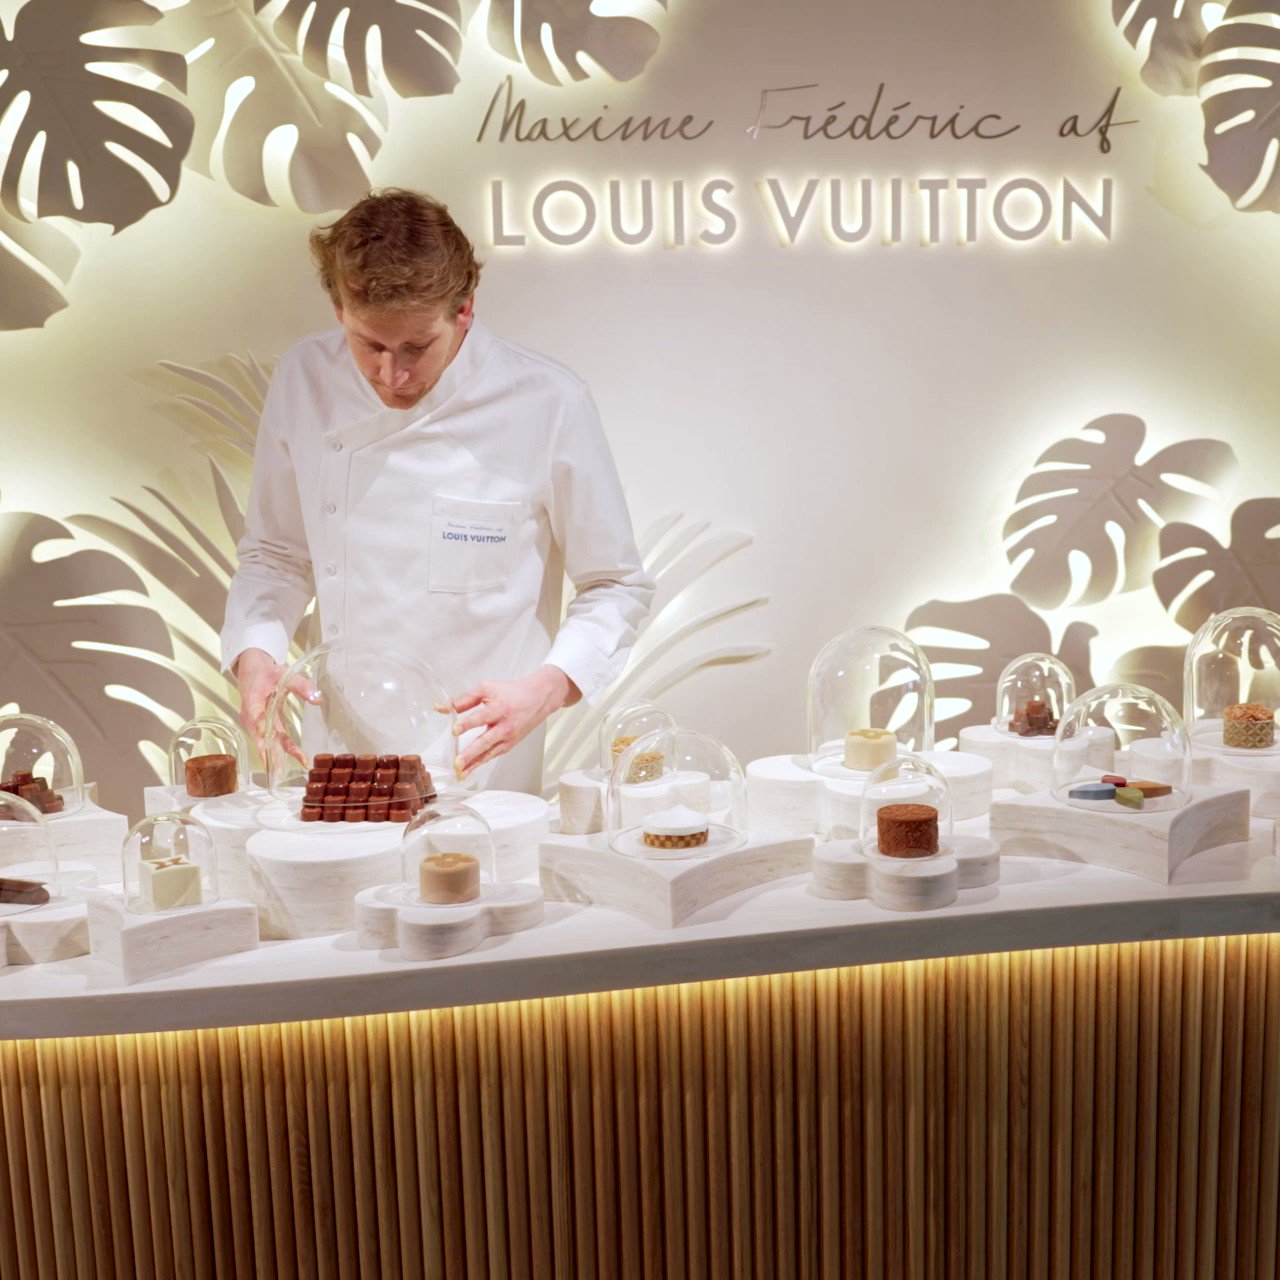 Lexi Nimmo on Instagram: The @louisvuitton cafe is a temporary pop up in  Paris offering a menu of decadent desserts create by famous pastry chef  @maxime.frederic ! It's located upstairs from the